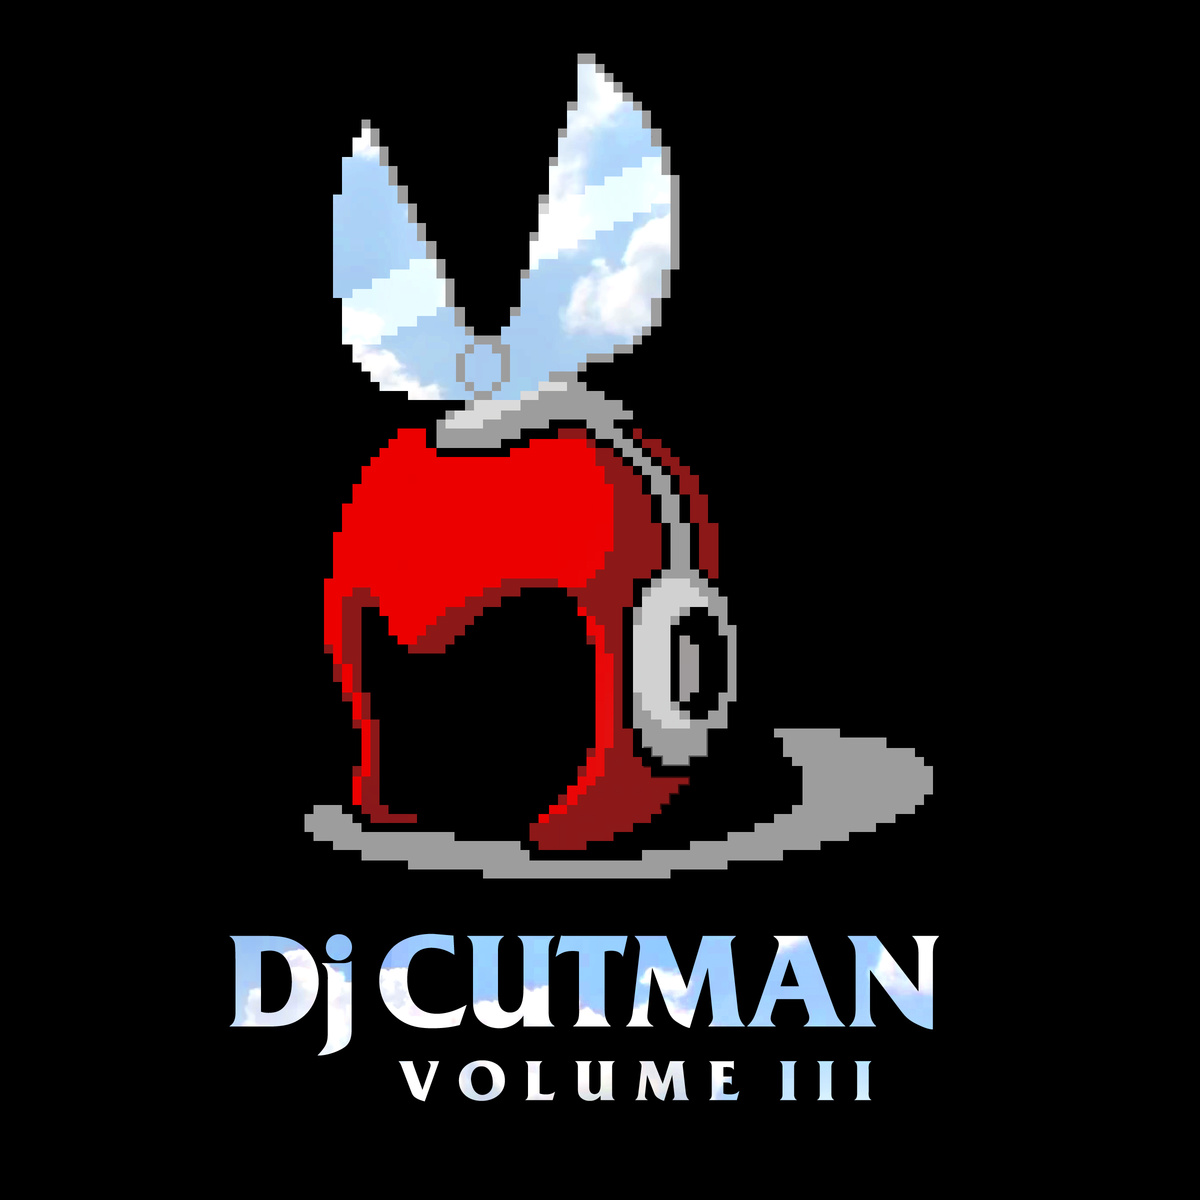 After a dope Livestream party last night on DJ Cutman's Twitch, it is now available! With remixes from games like Star Tropics, Link's Awakening and Sonic 2, it's def worth checking out! how do you feel about the release? Listen and Comment below!